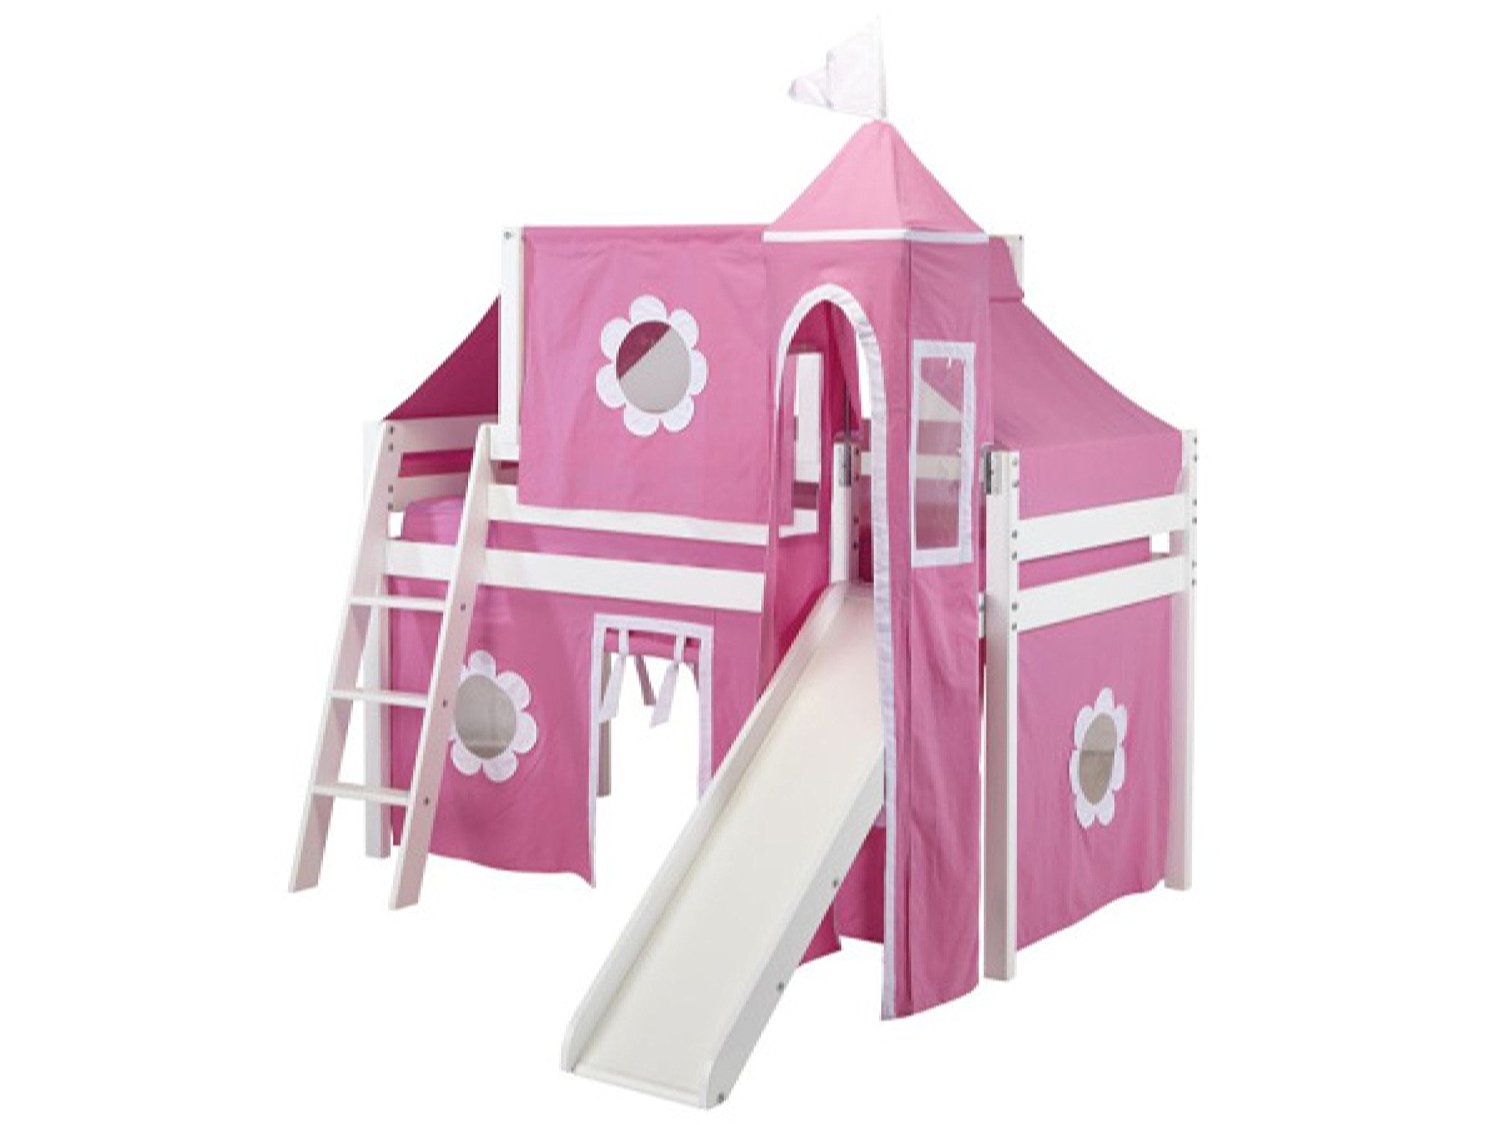 Jackpot Princess Low Loft White Bed with Slide, Pink and White Tent and Tower